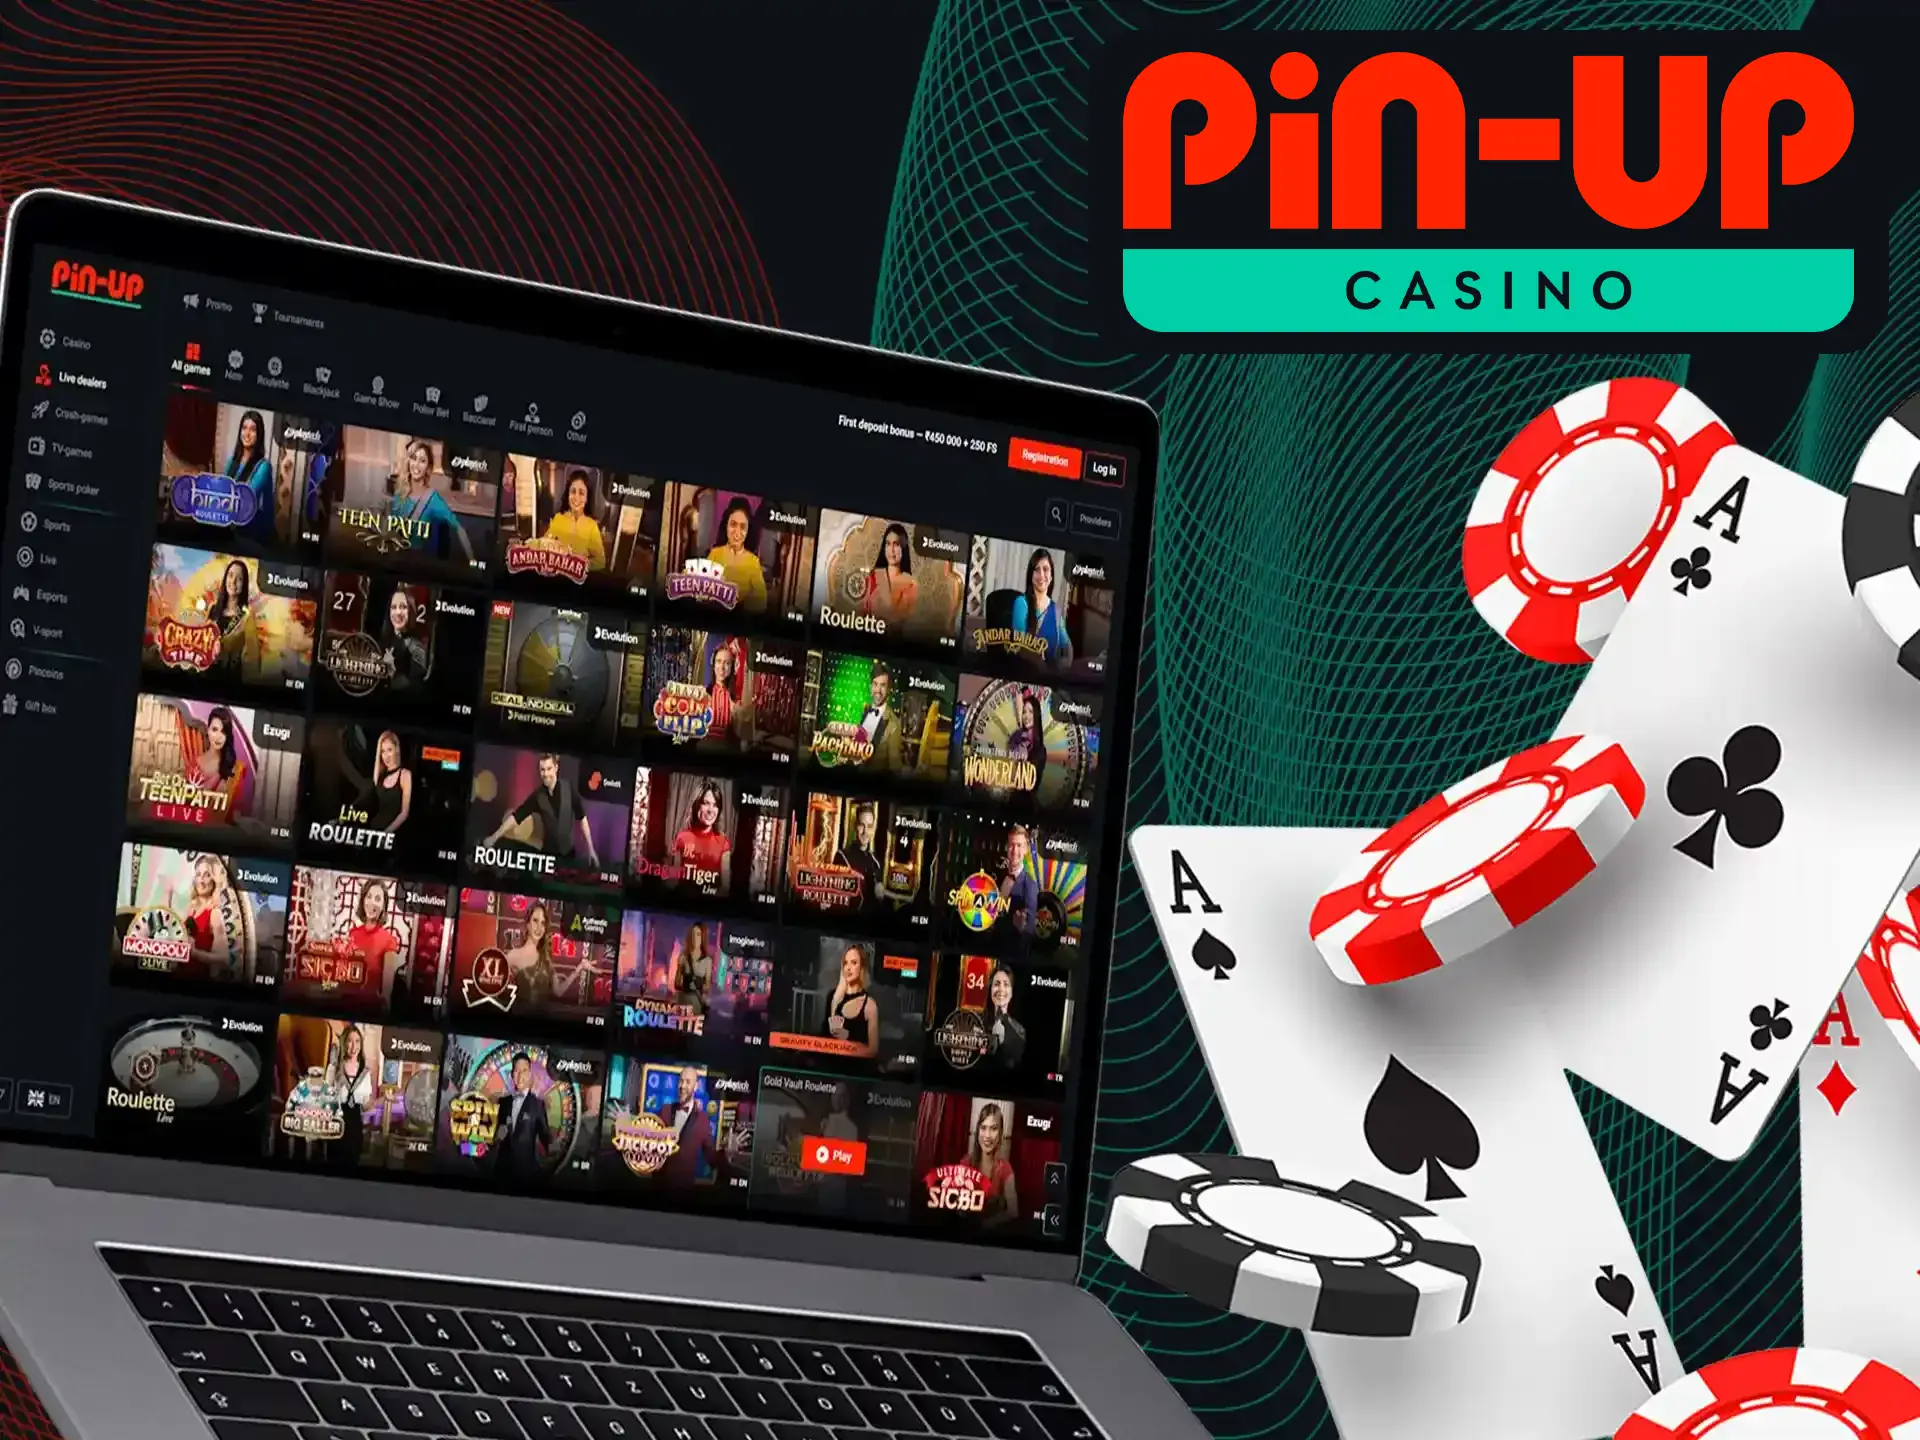 When playing with live dealers at Pin-Up Casino, you can experience the authentic atmosphere of a real casino.